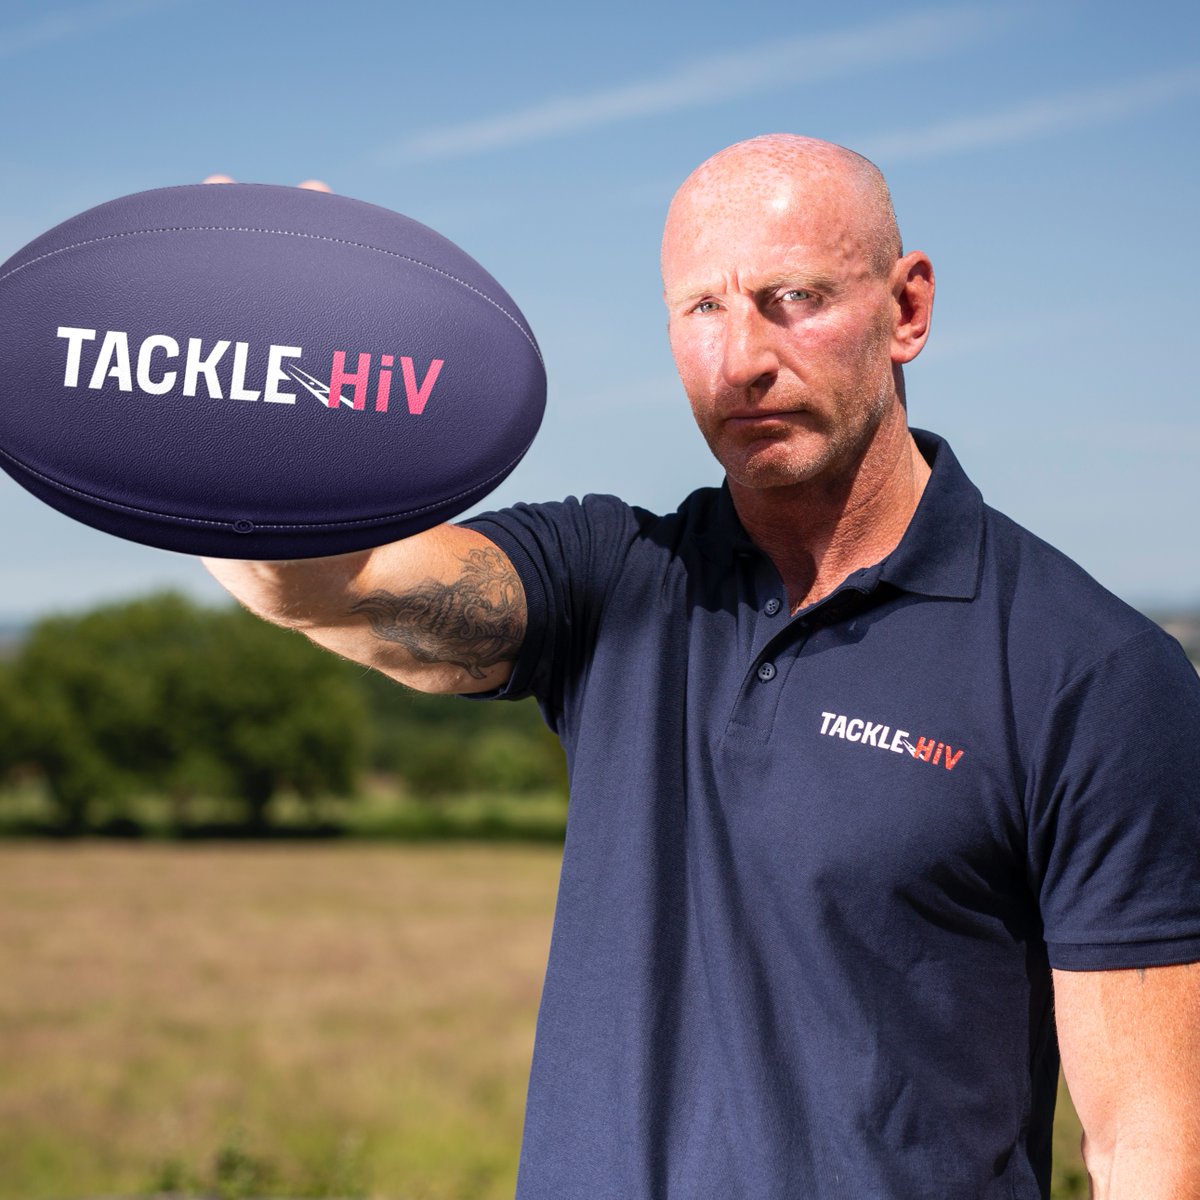 It’s time for us all to #TackleHIV. We want to meet the @UNAIDS target of ending HIV transmission by 2030, but to do this we must break down stigma and challenge misinformation. Follow us here @TackleHIV to find out how you can help make a difference 🤝 @ViiVHC